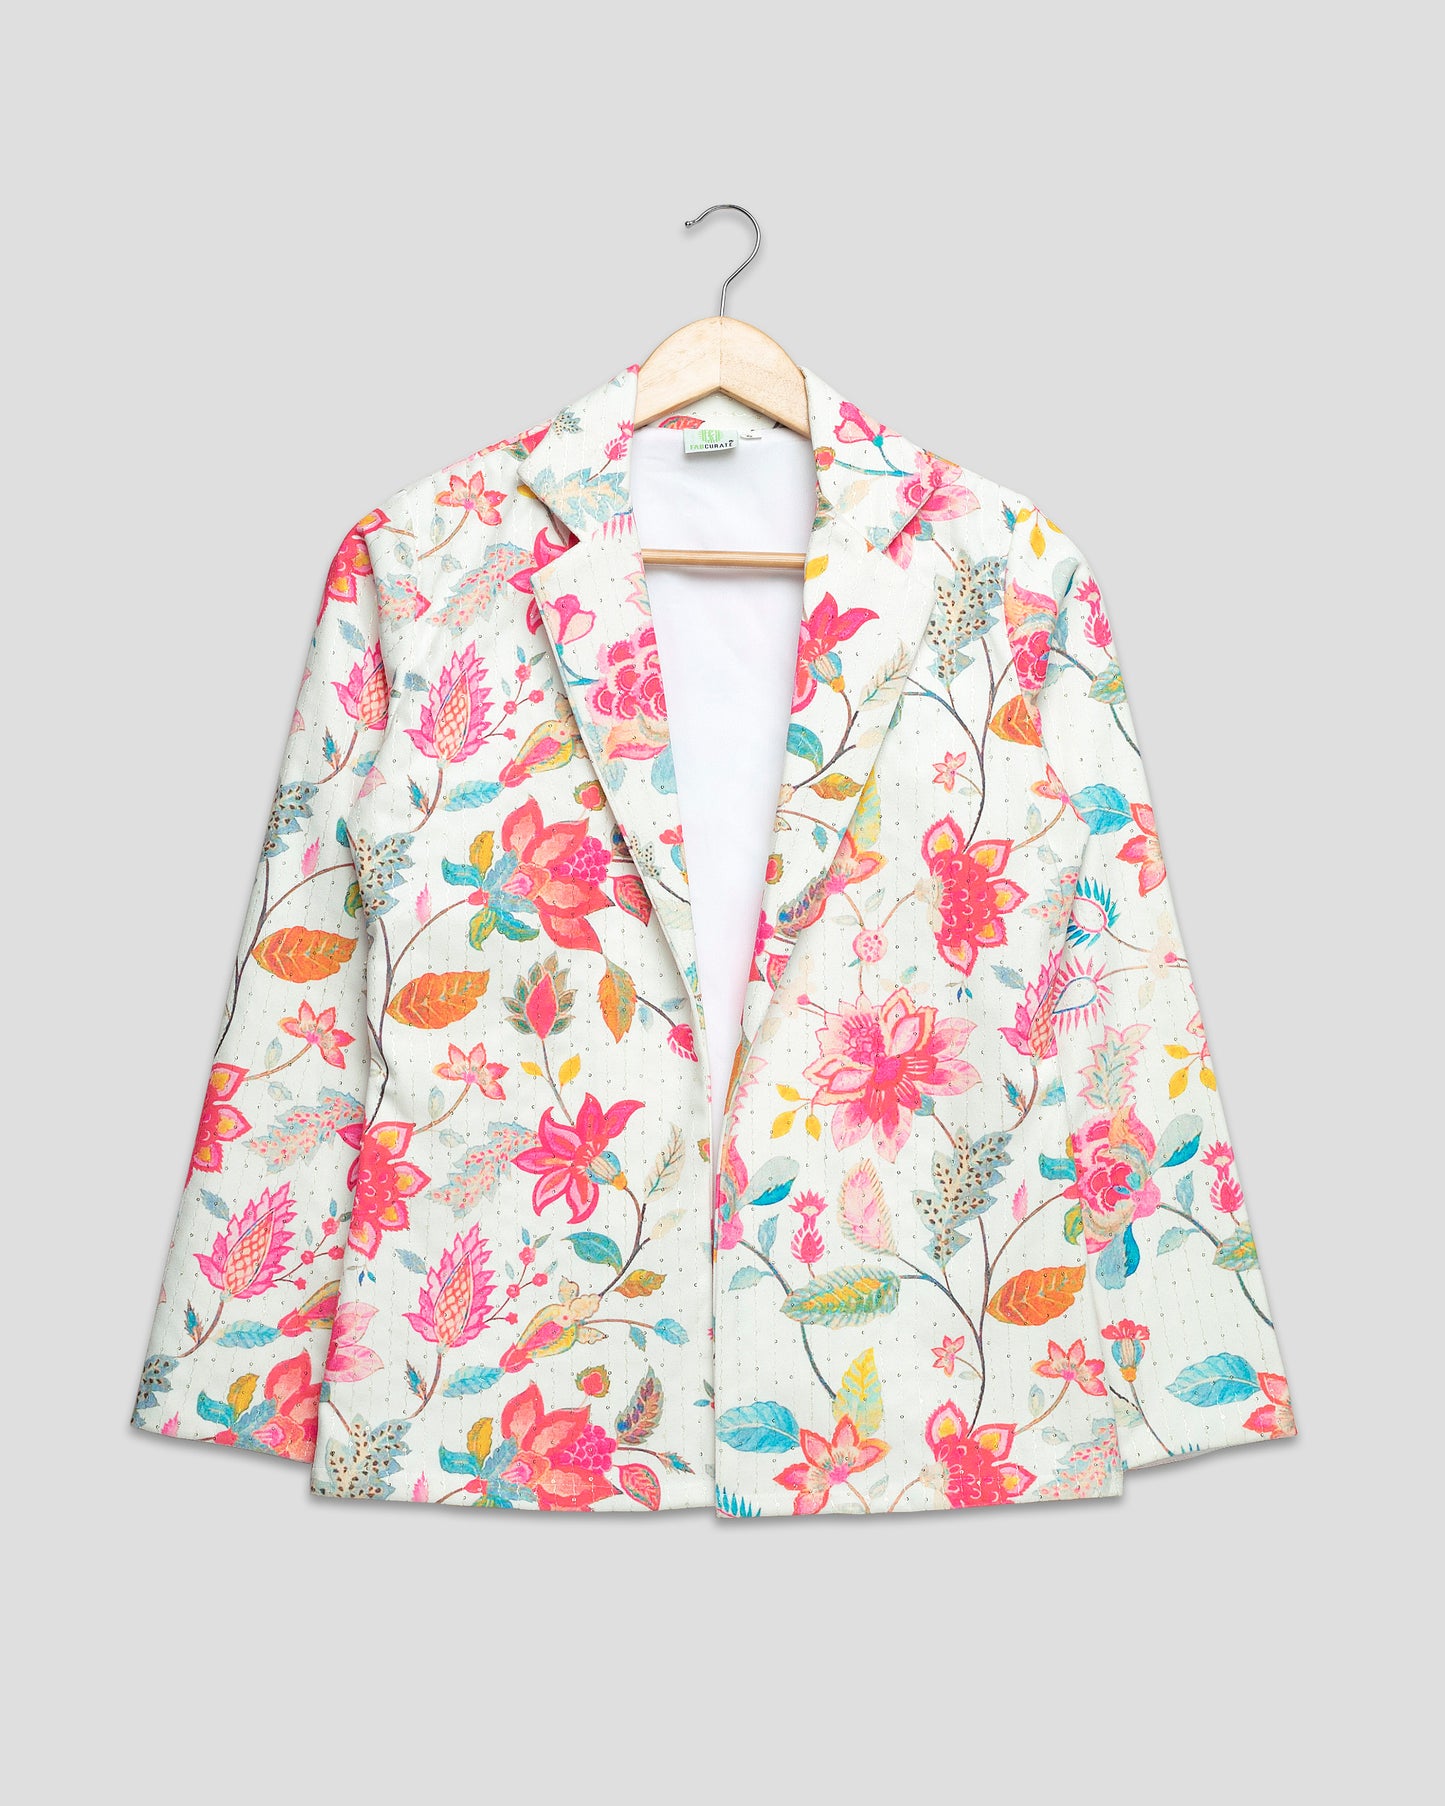 Floral Printed sequined Velvet Jackets for Glamorous Style